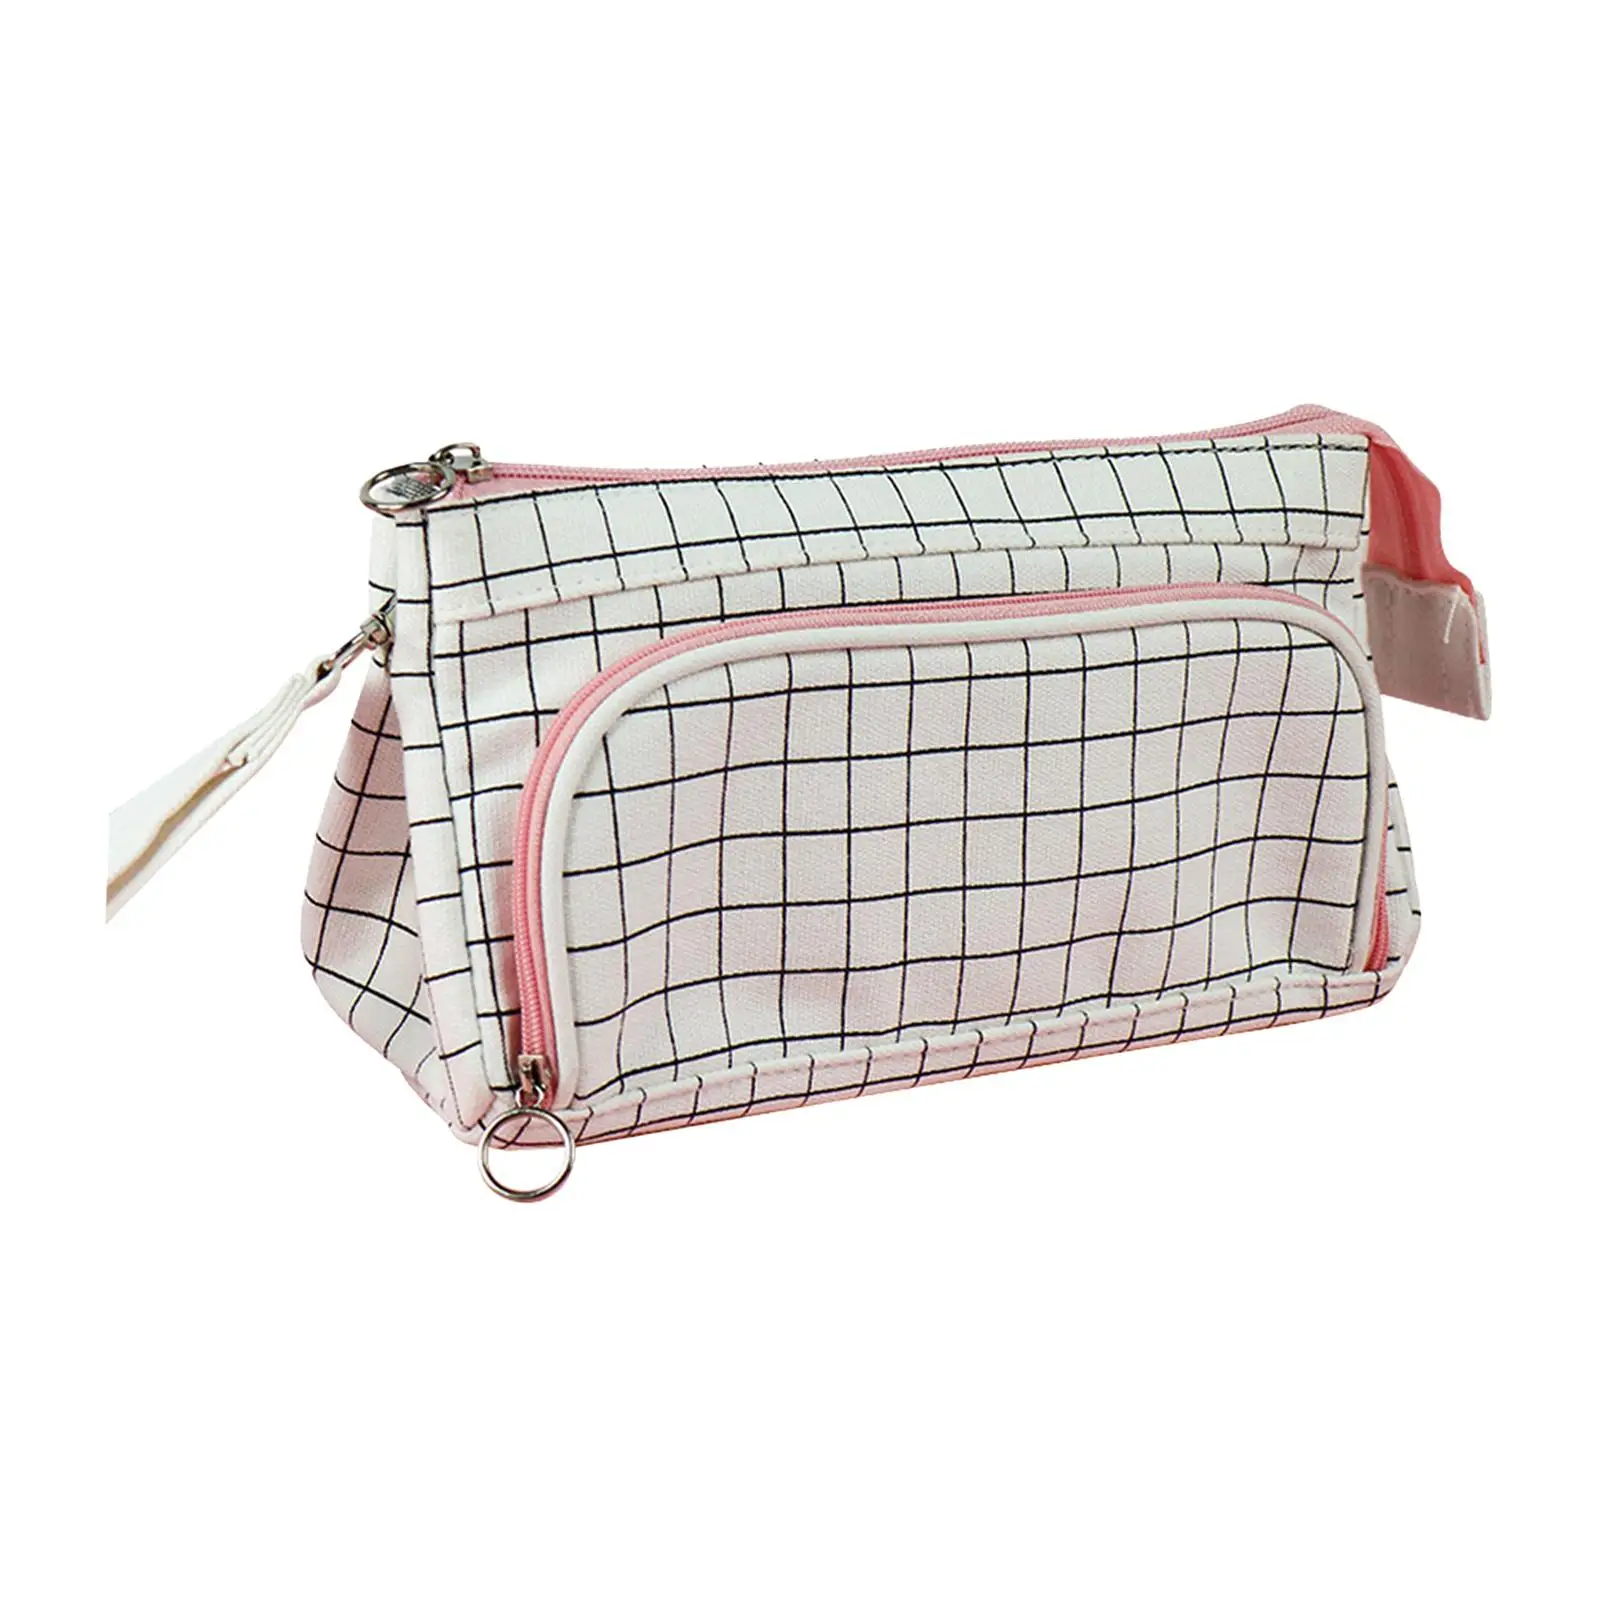 Pencil Pouch Bag Big Capacity Mesh Pouches Lightweight Cosmetic Makeup Bag Marker Pen Pouch Toiletry Bag for Student Grils Boys